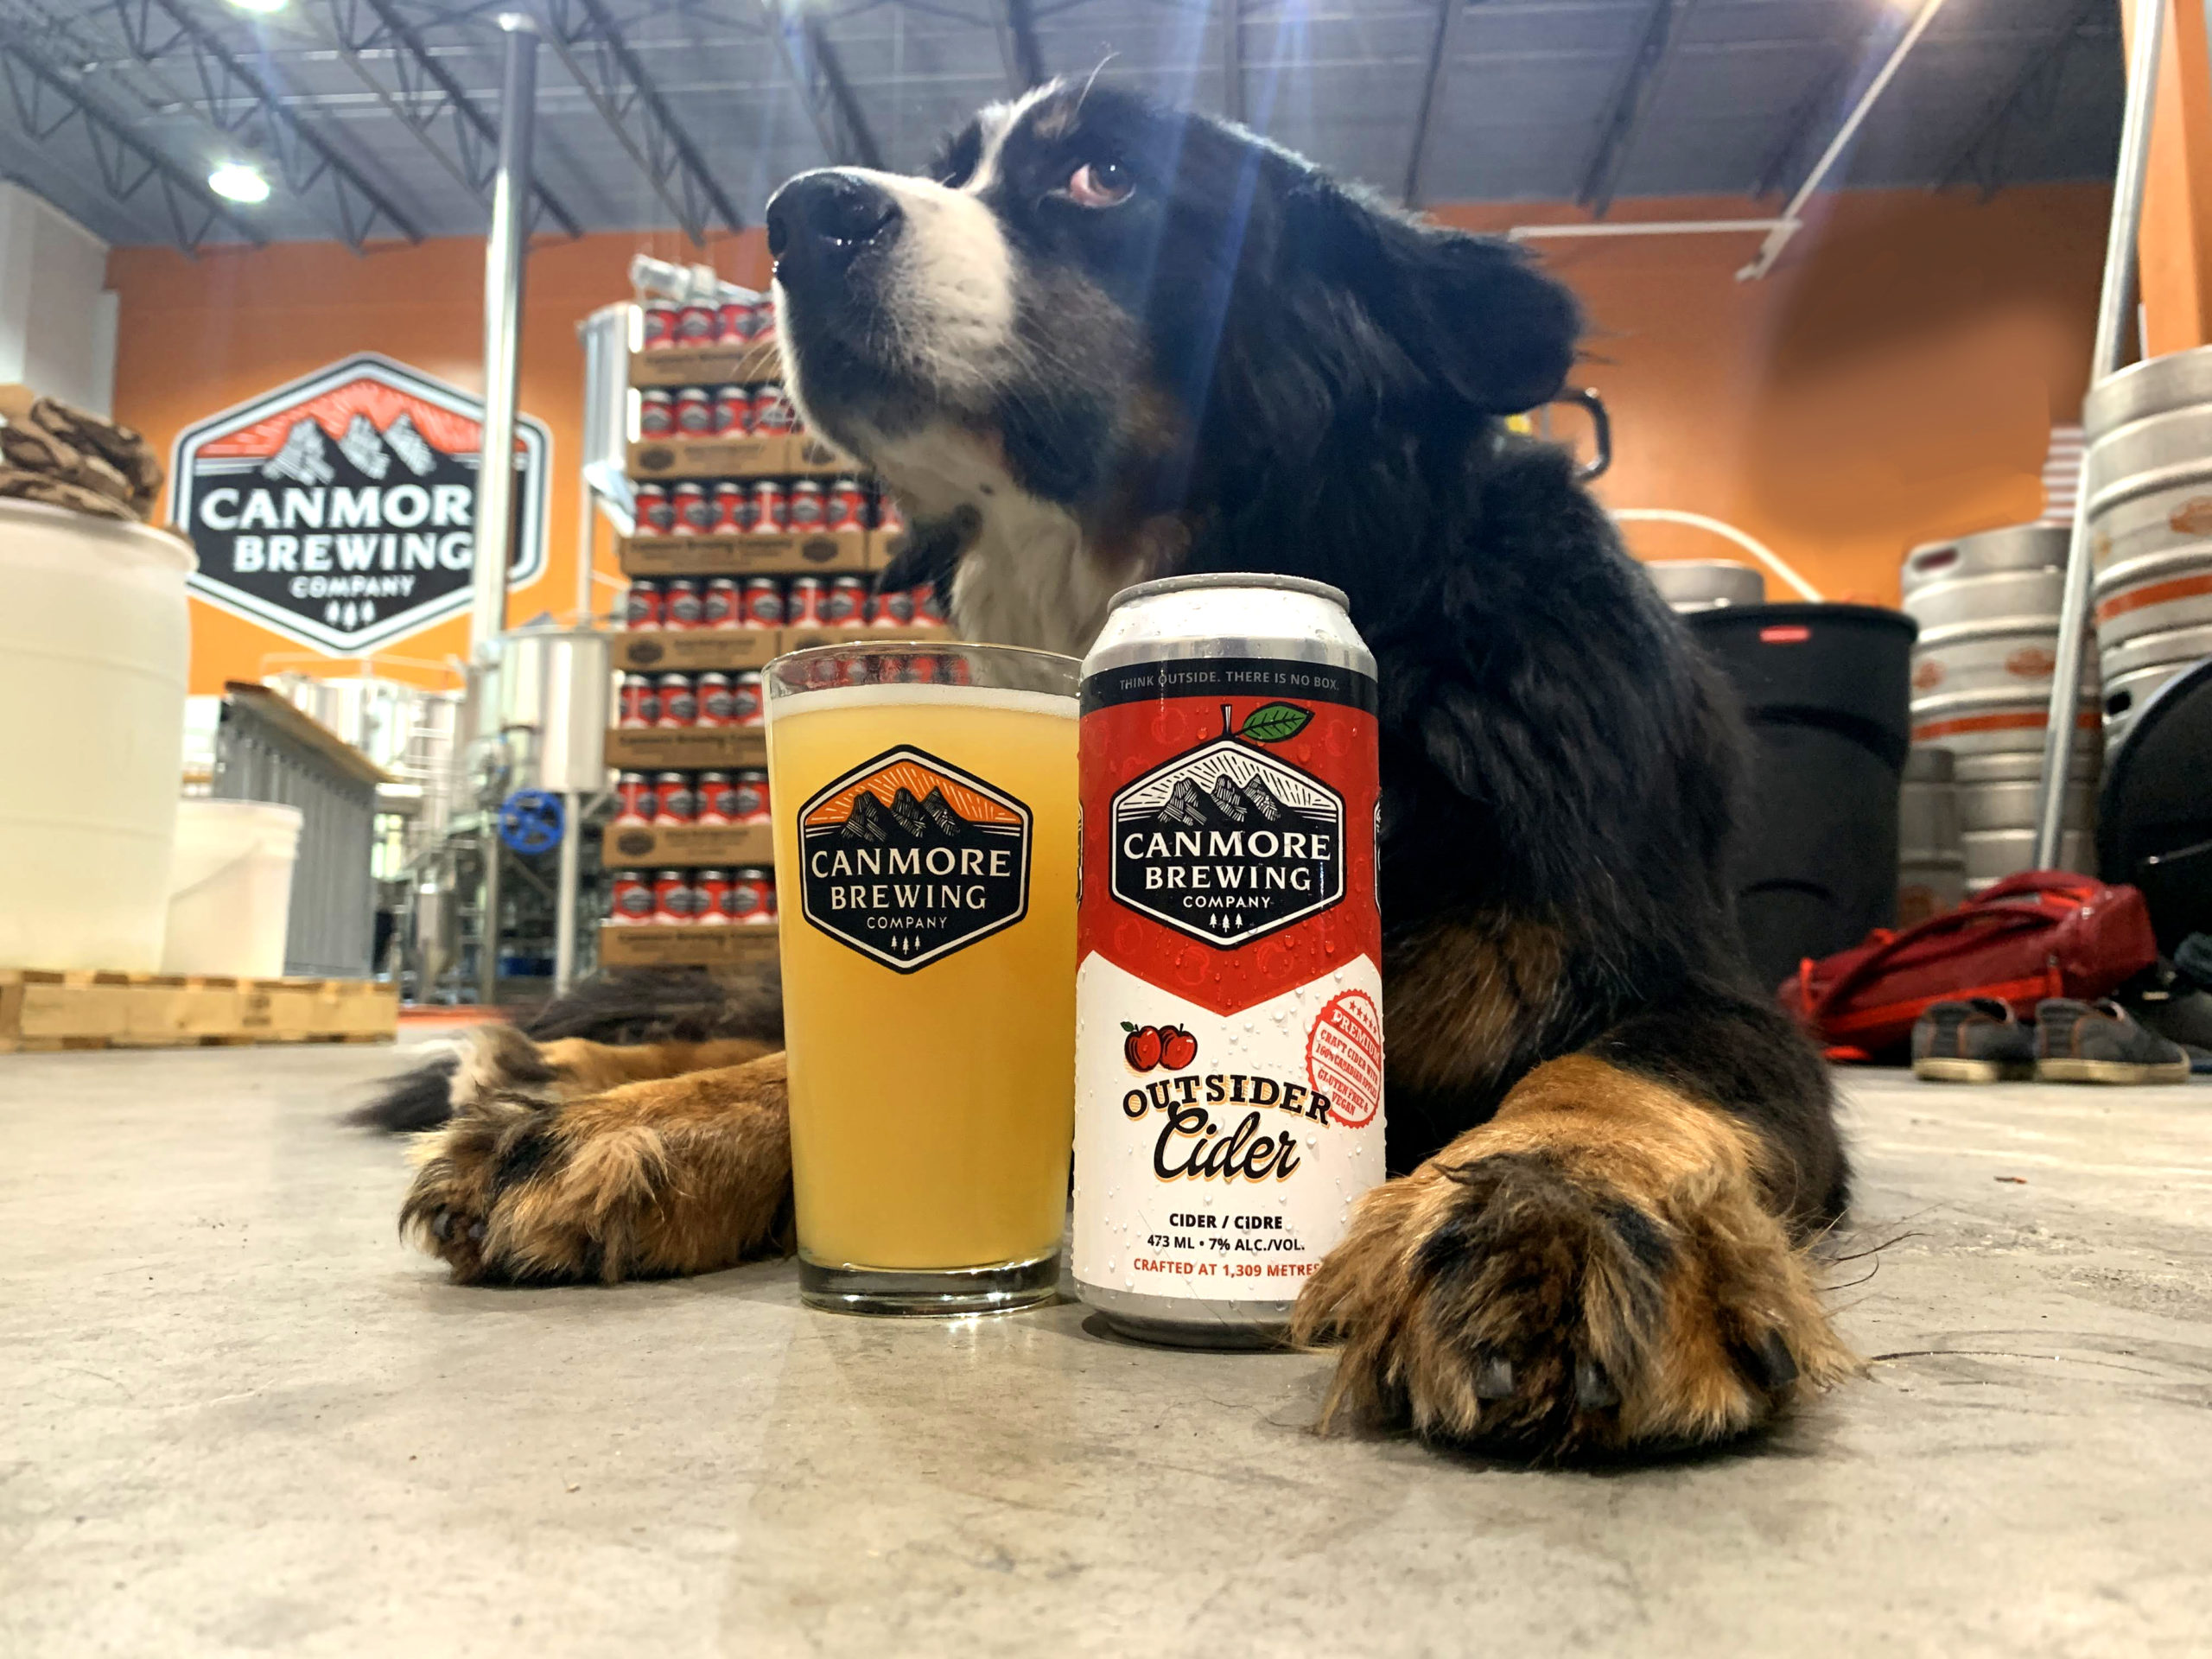 Canmore Brewing Pint Can and dog